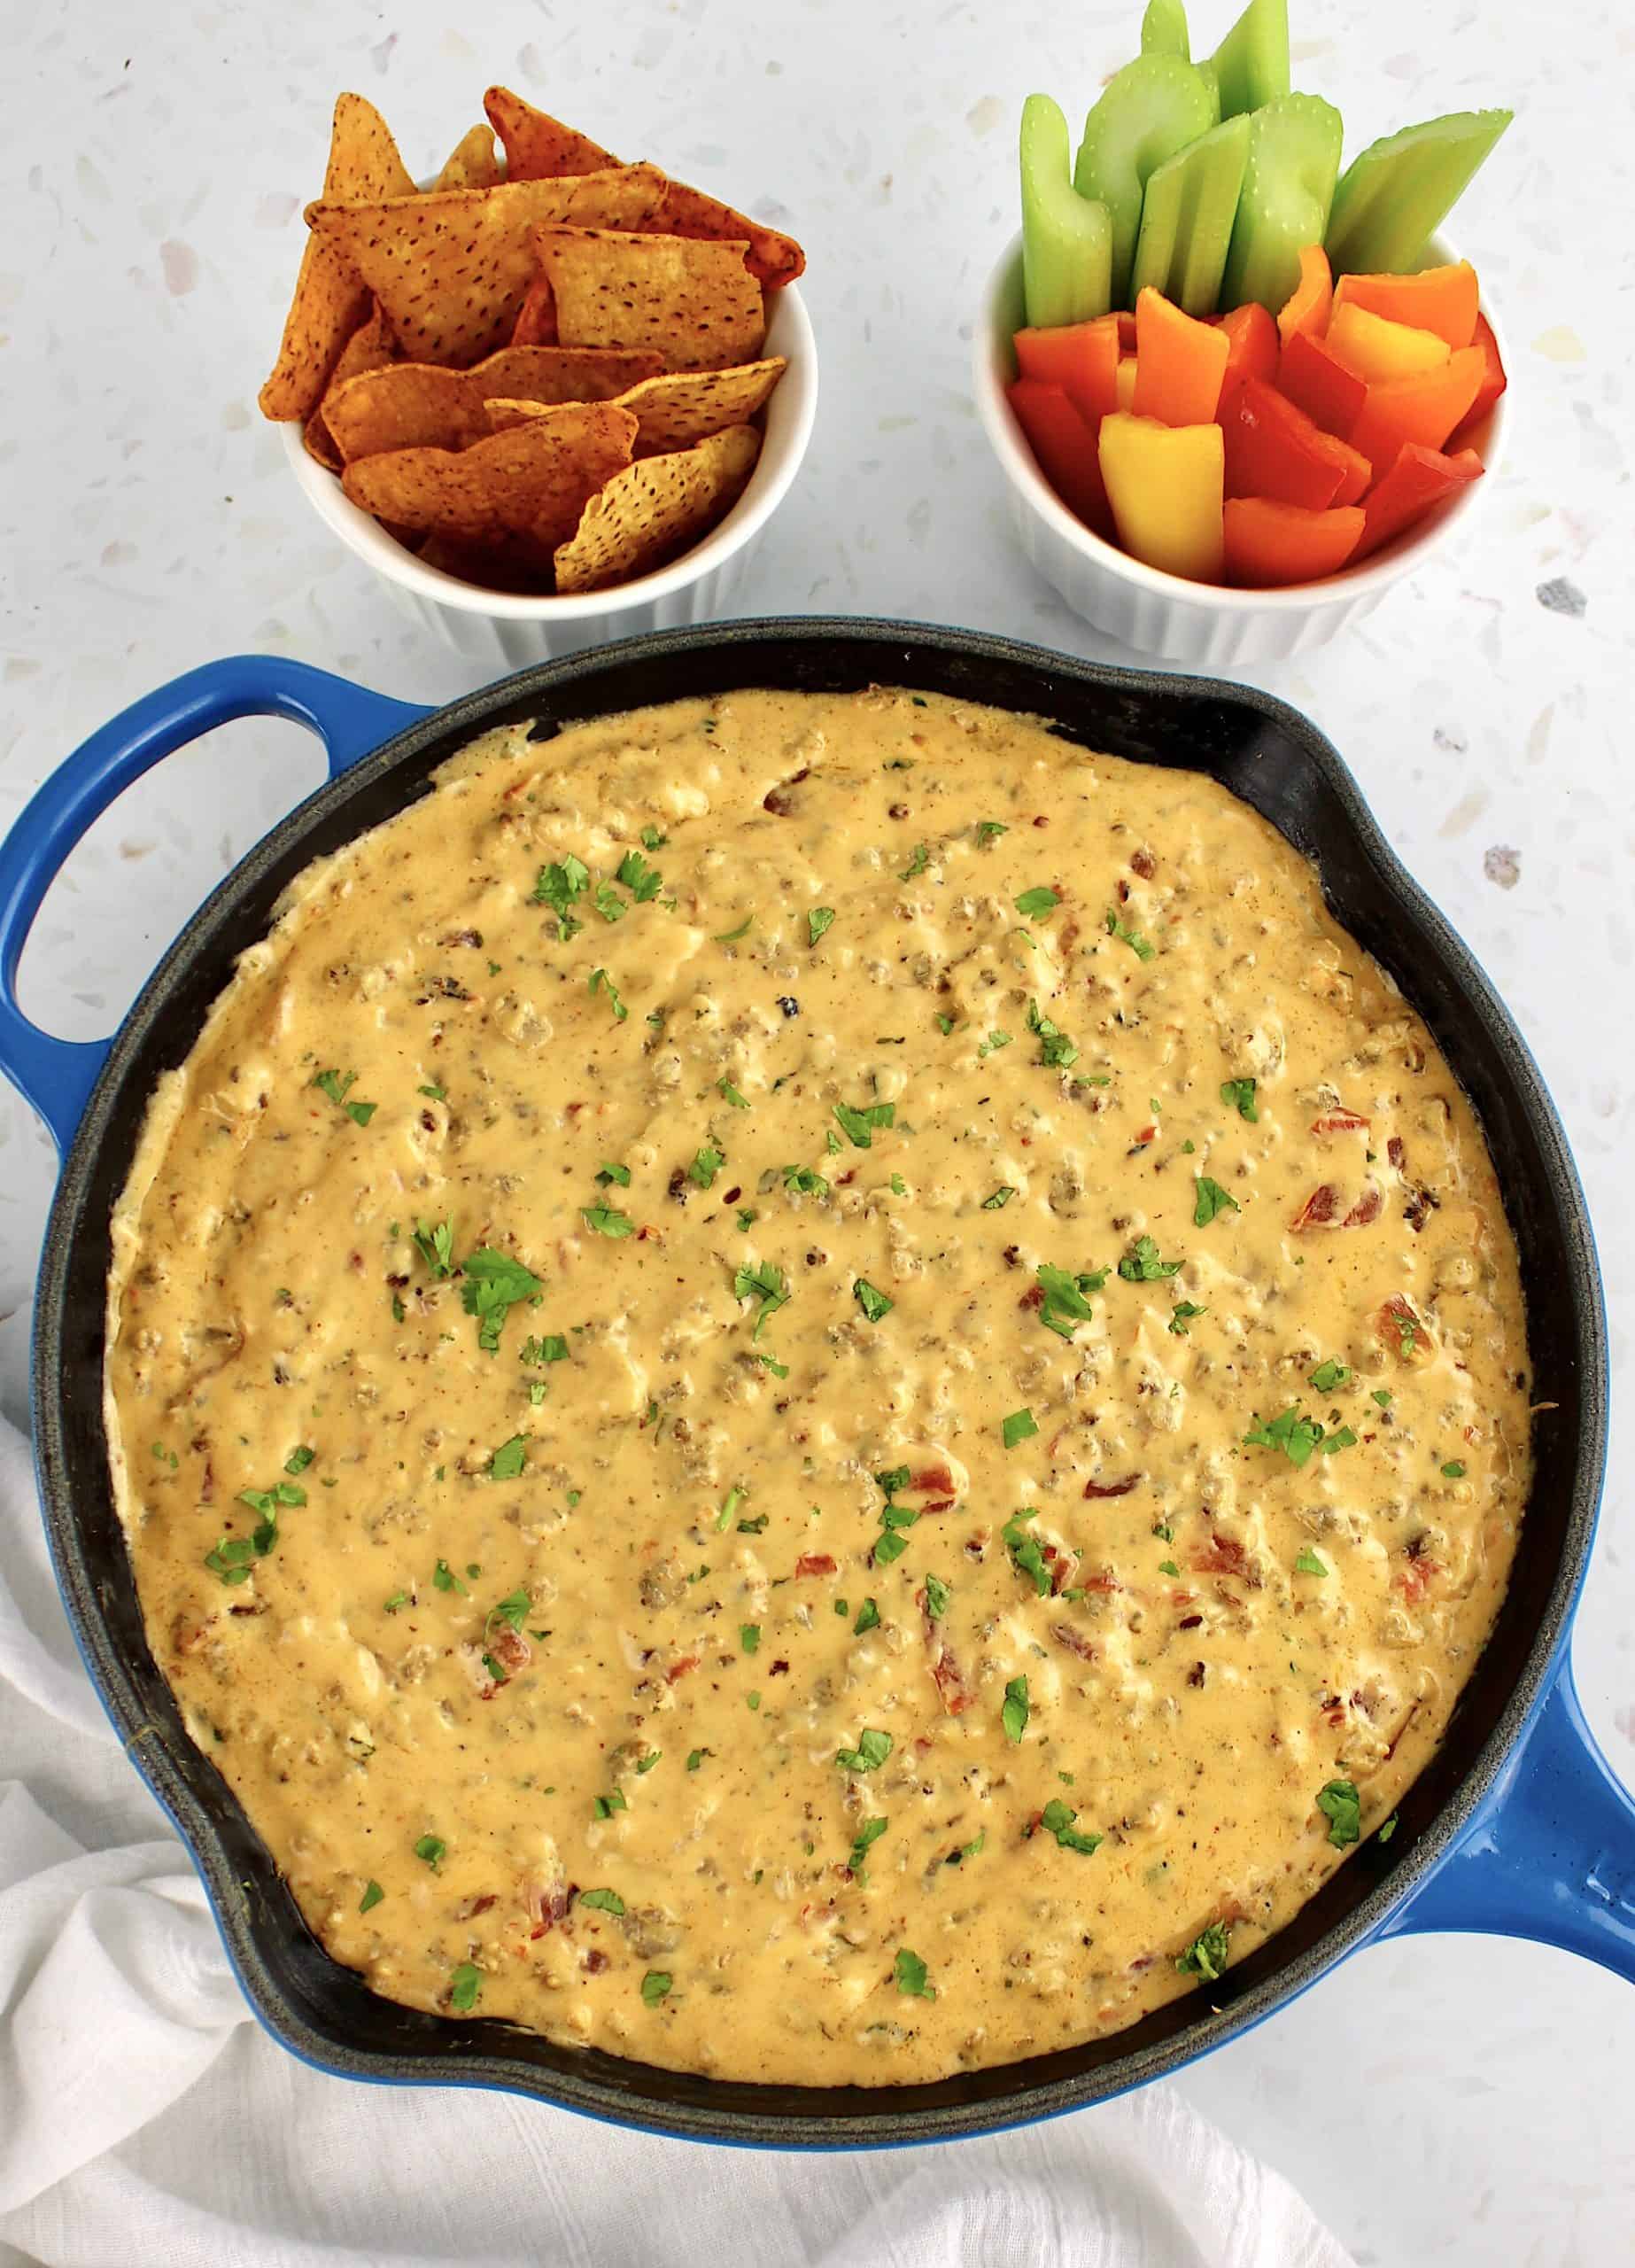 Sausage Rotel Dip in skillet with tortilla chips and pepper slices on side